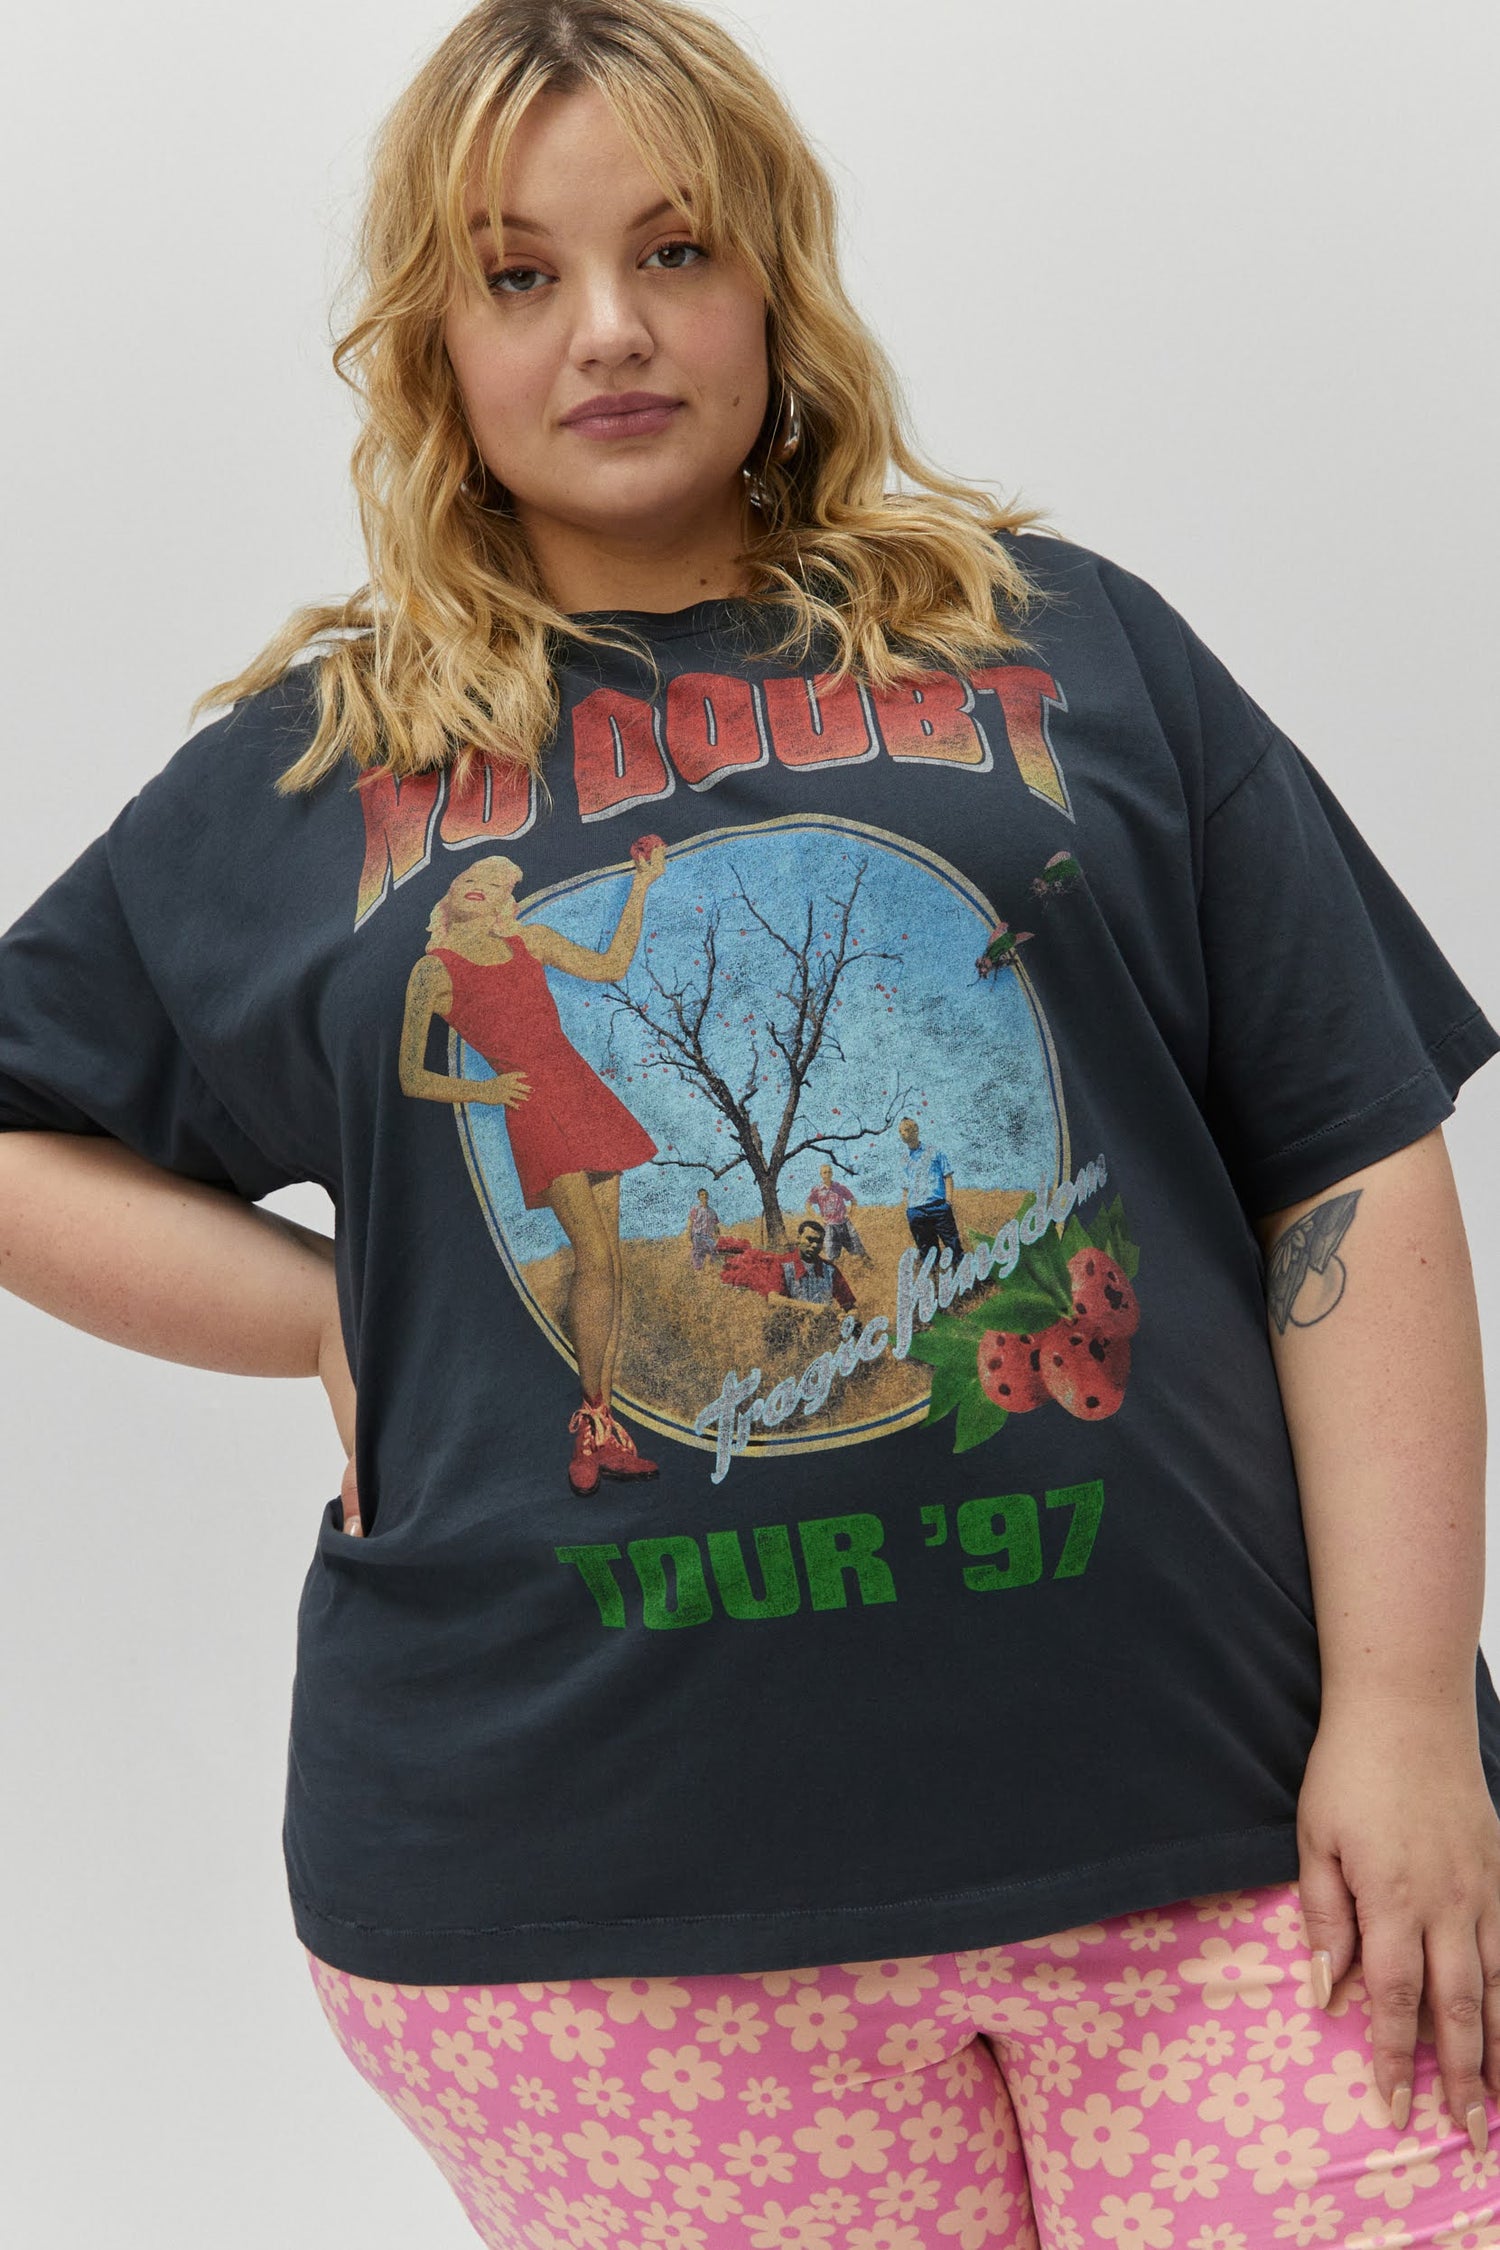 Blonde haired model featuring a hella Good tee drops with No Doubt’s most successful album “Tragic Kingdom”.